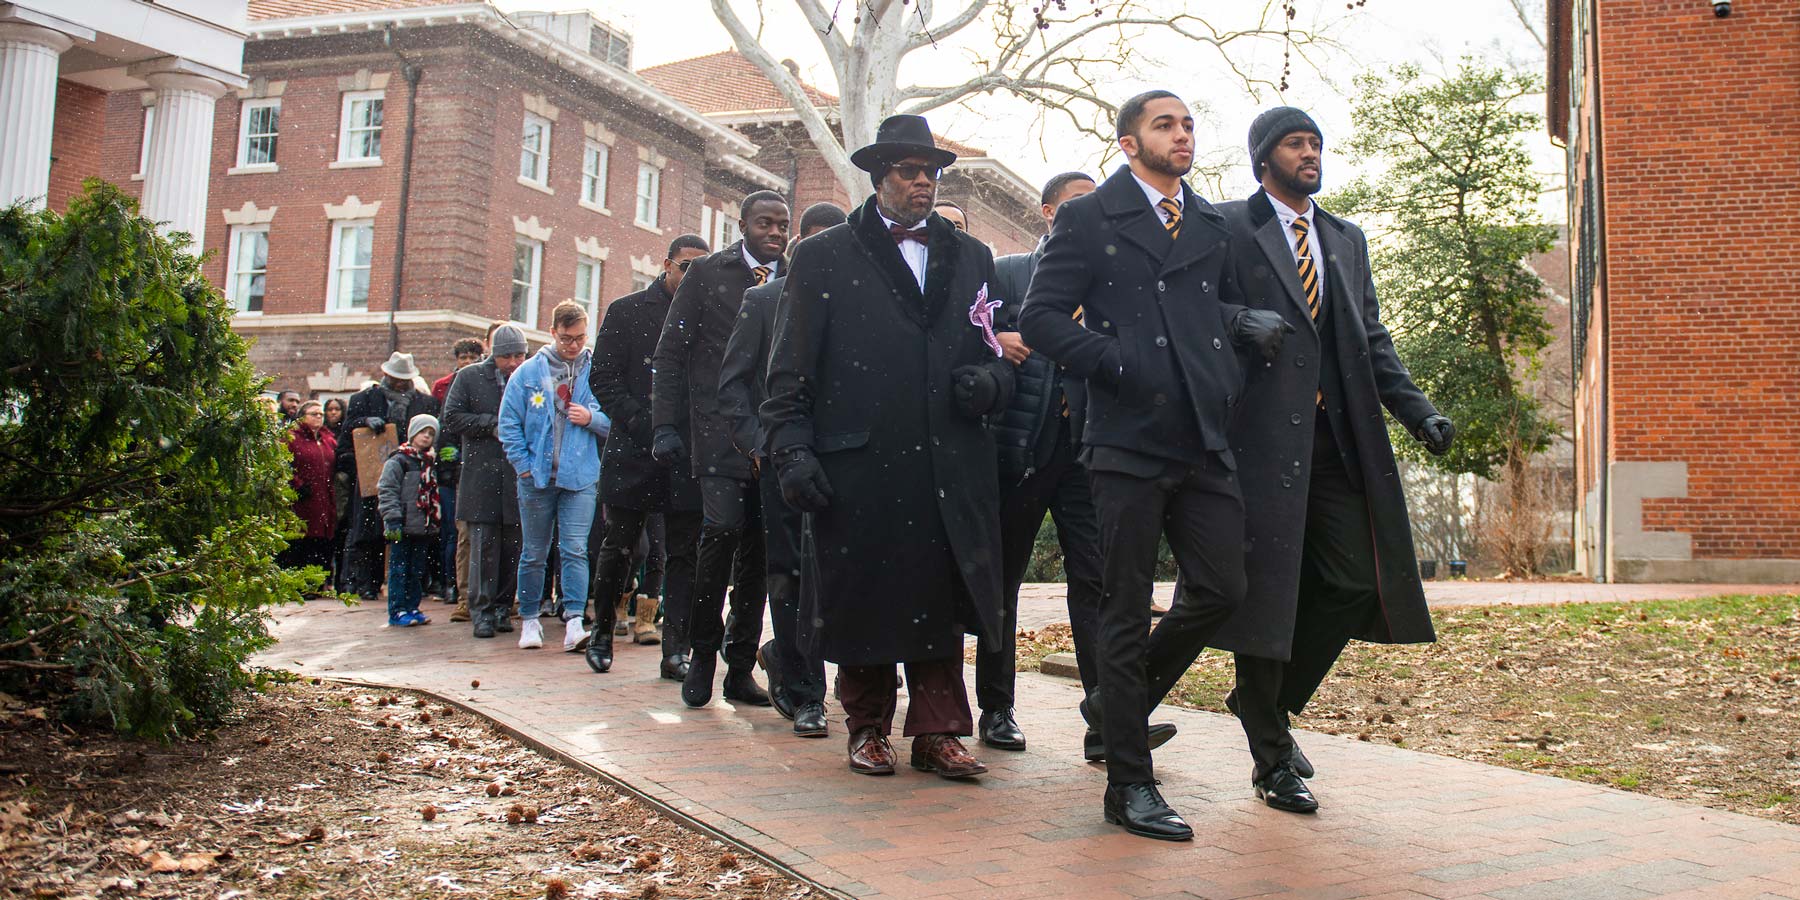 MLK Jr Silent March on the campus of College Green.